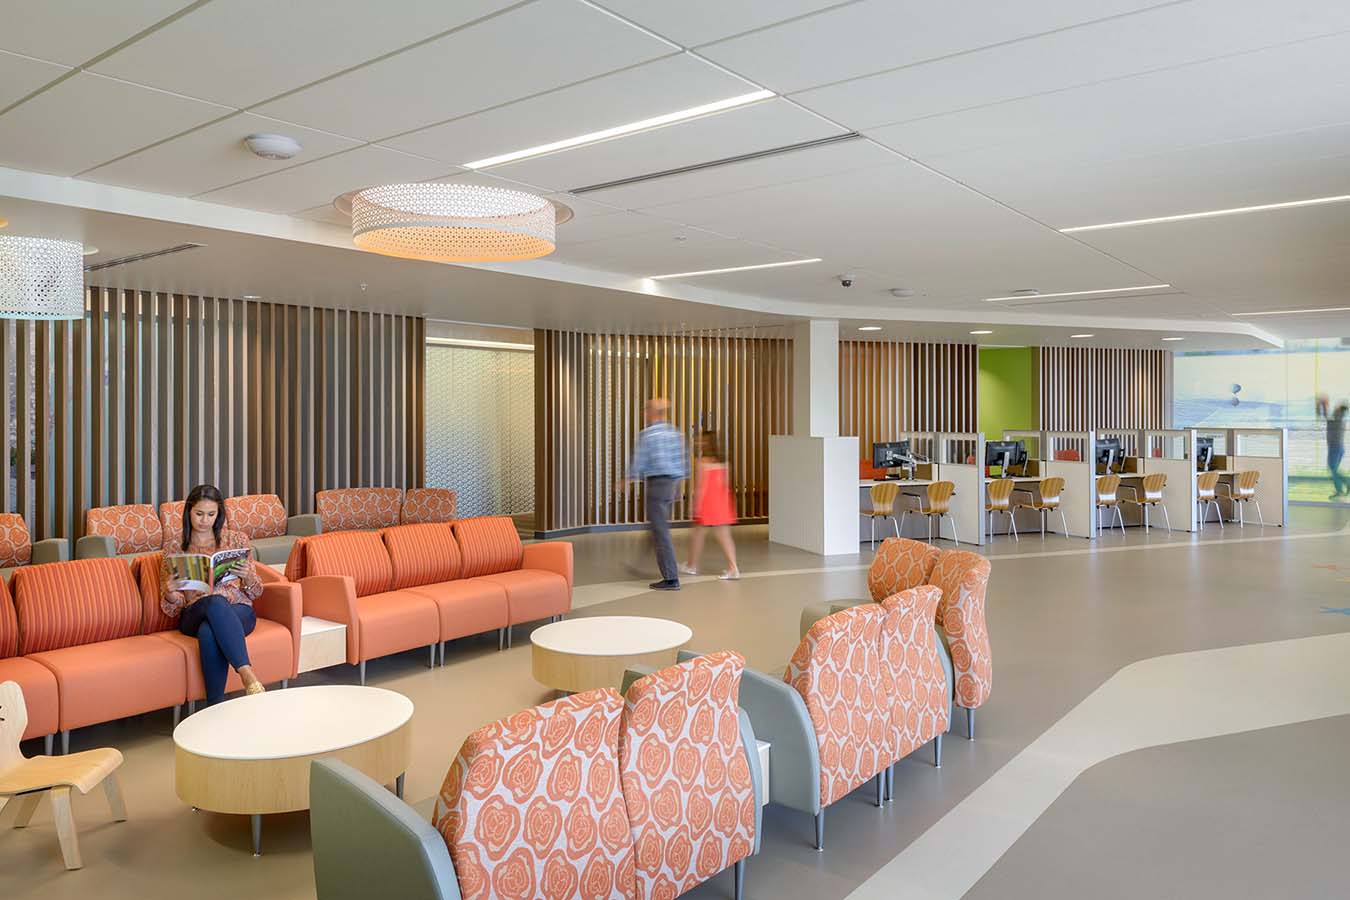 South Clinic Common Area